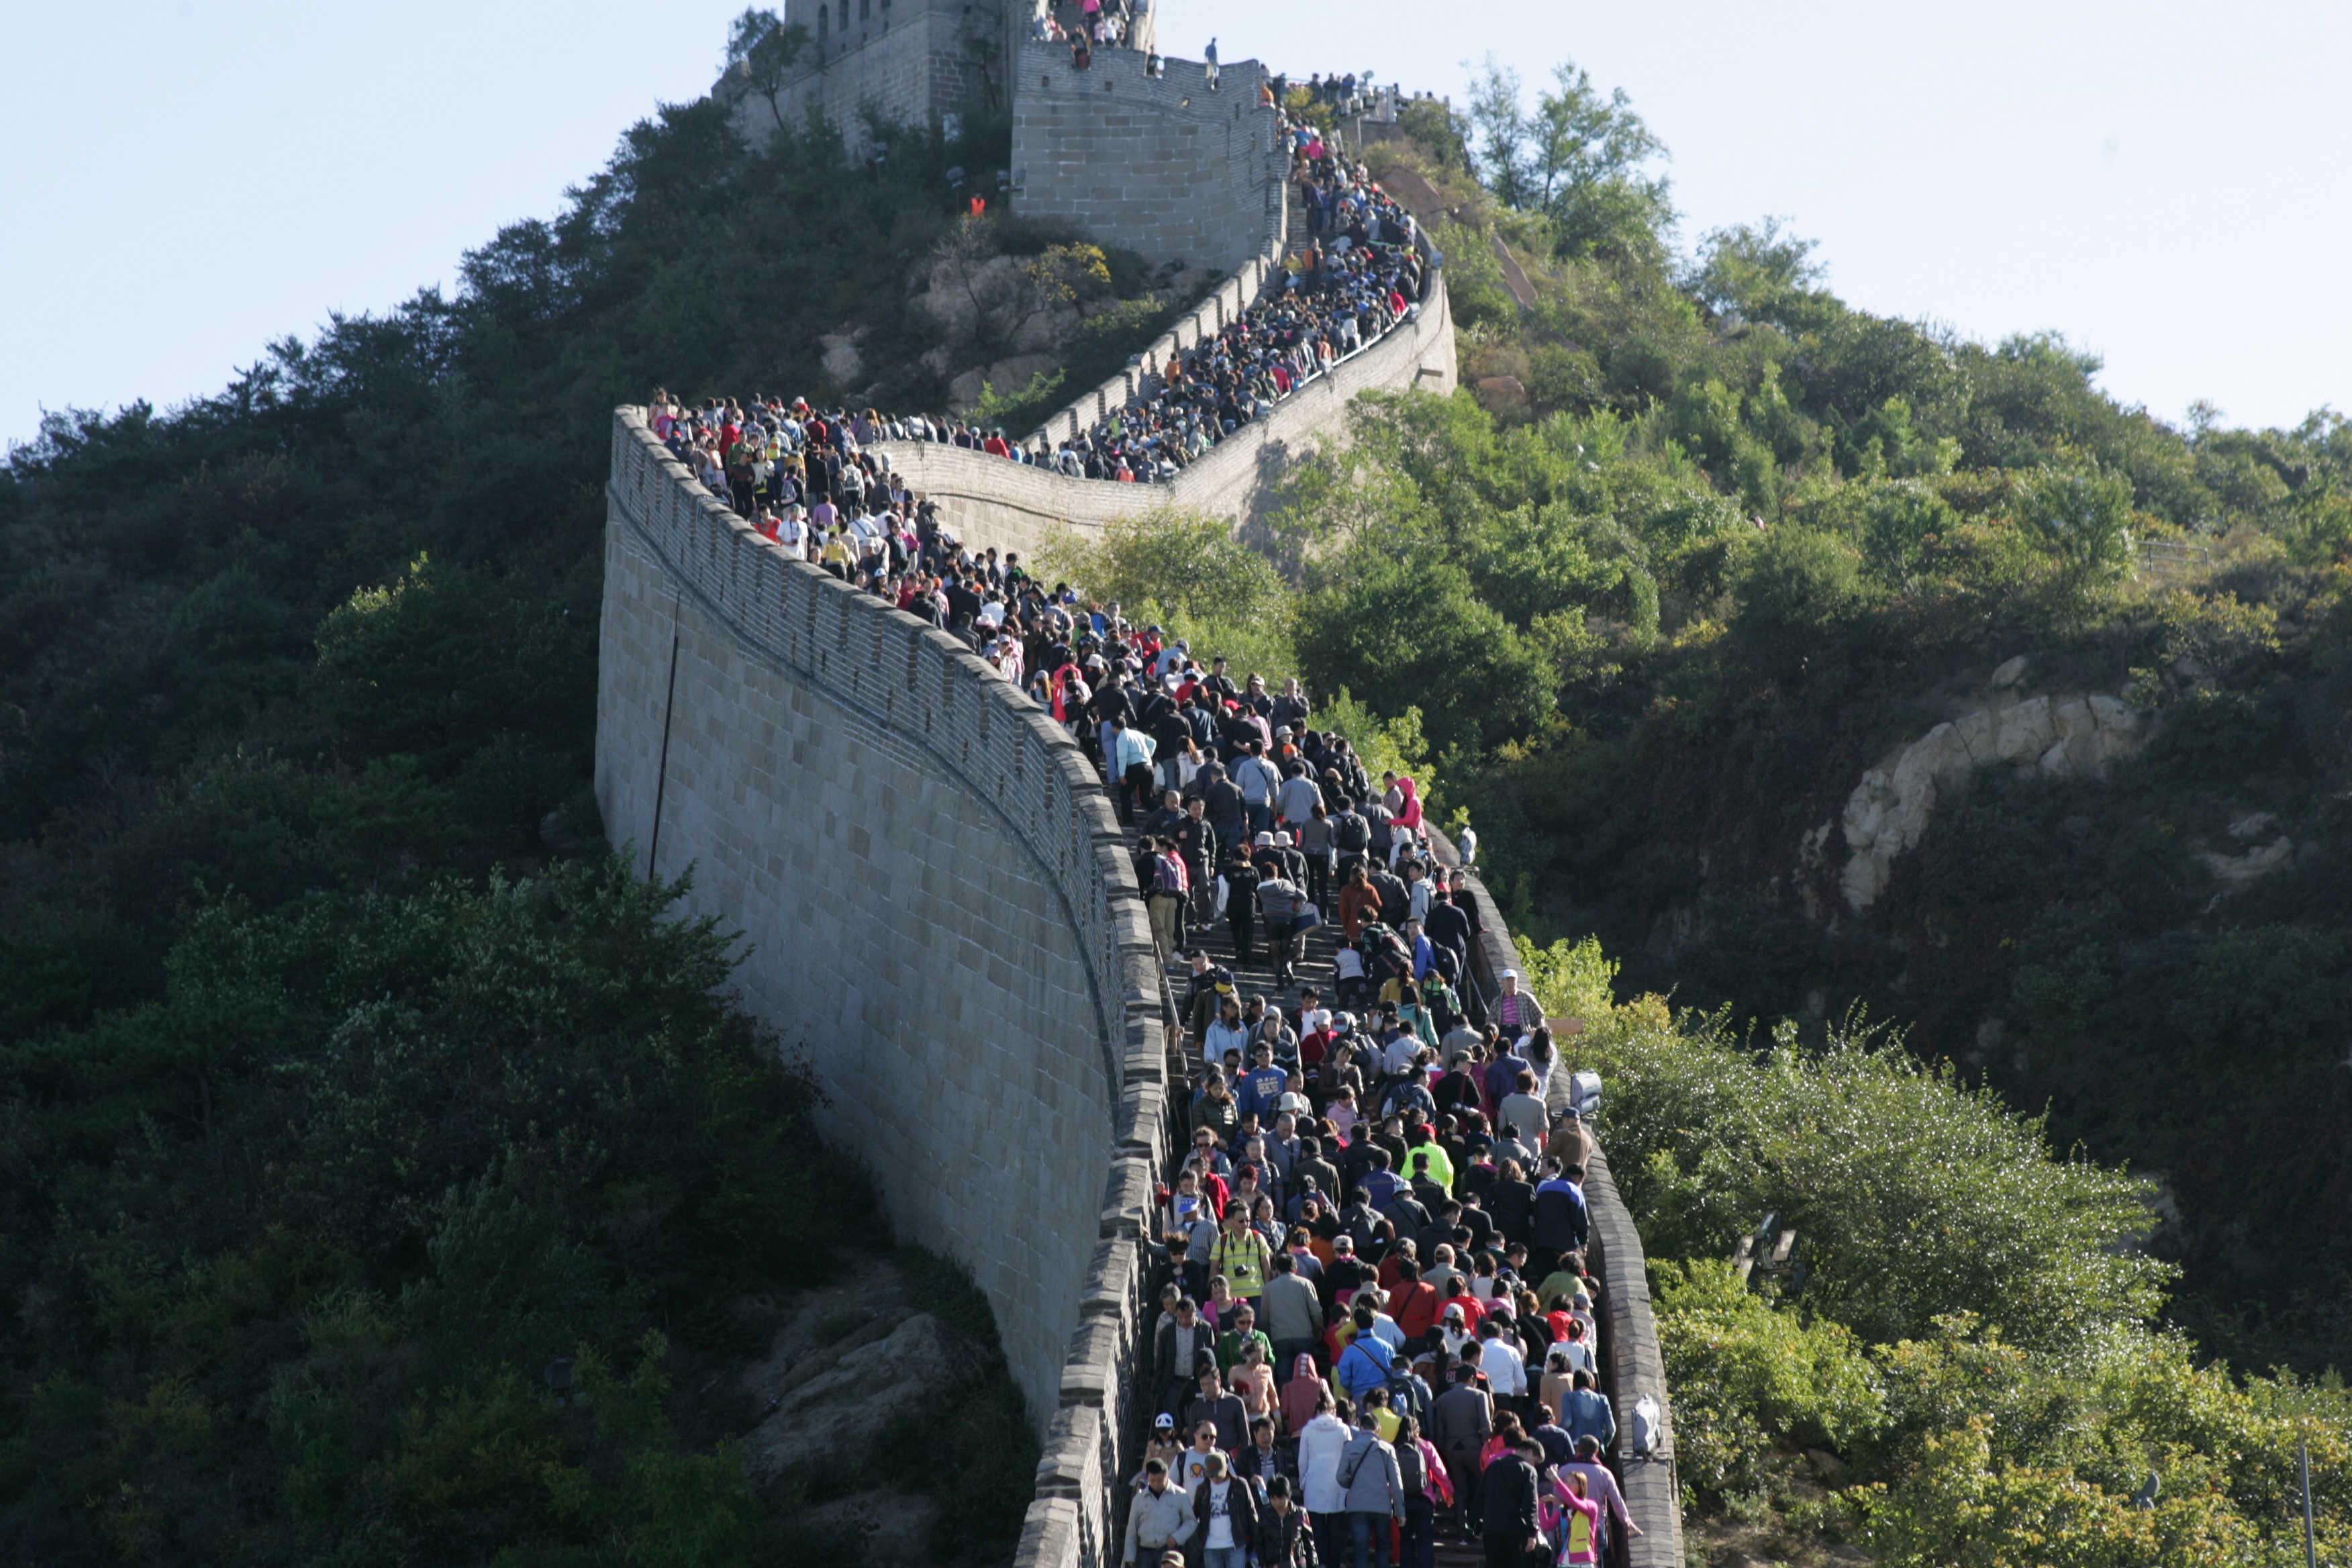 People crowded to visit the Great Wall on October 2, 2013 in Beijing, China. (VCG—VCG via Getty Images)